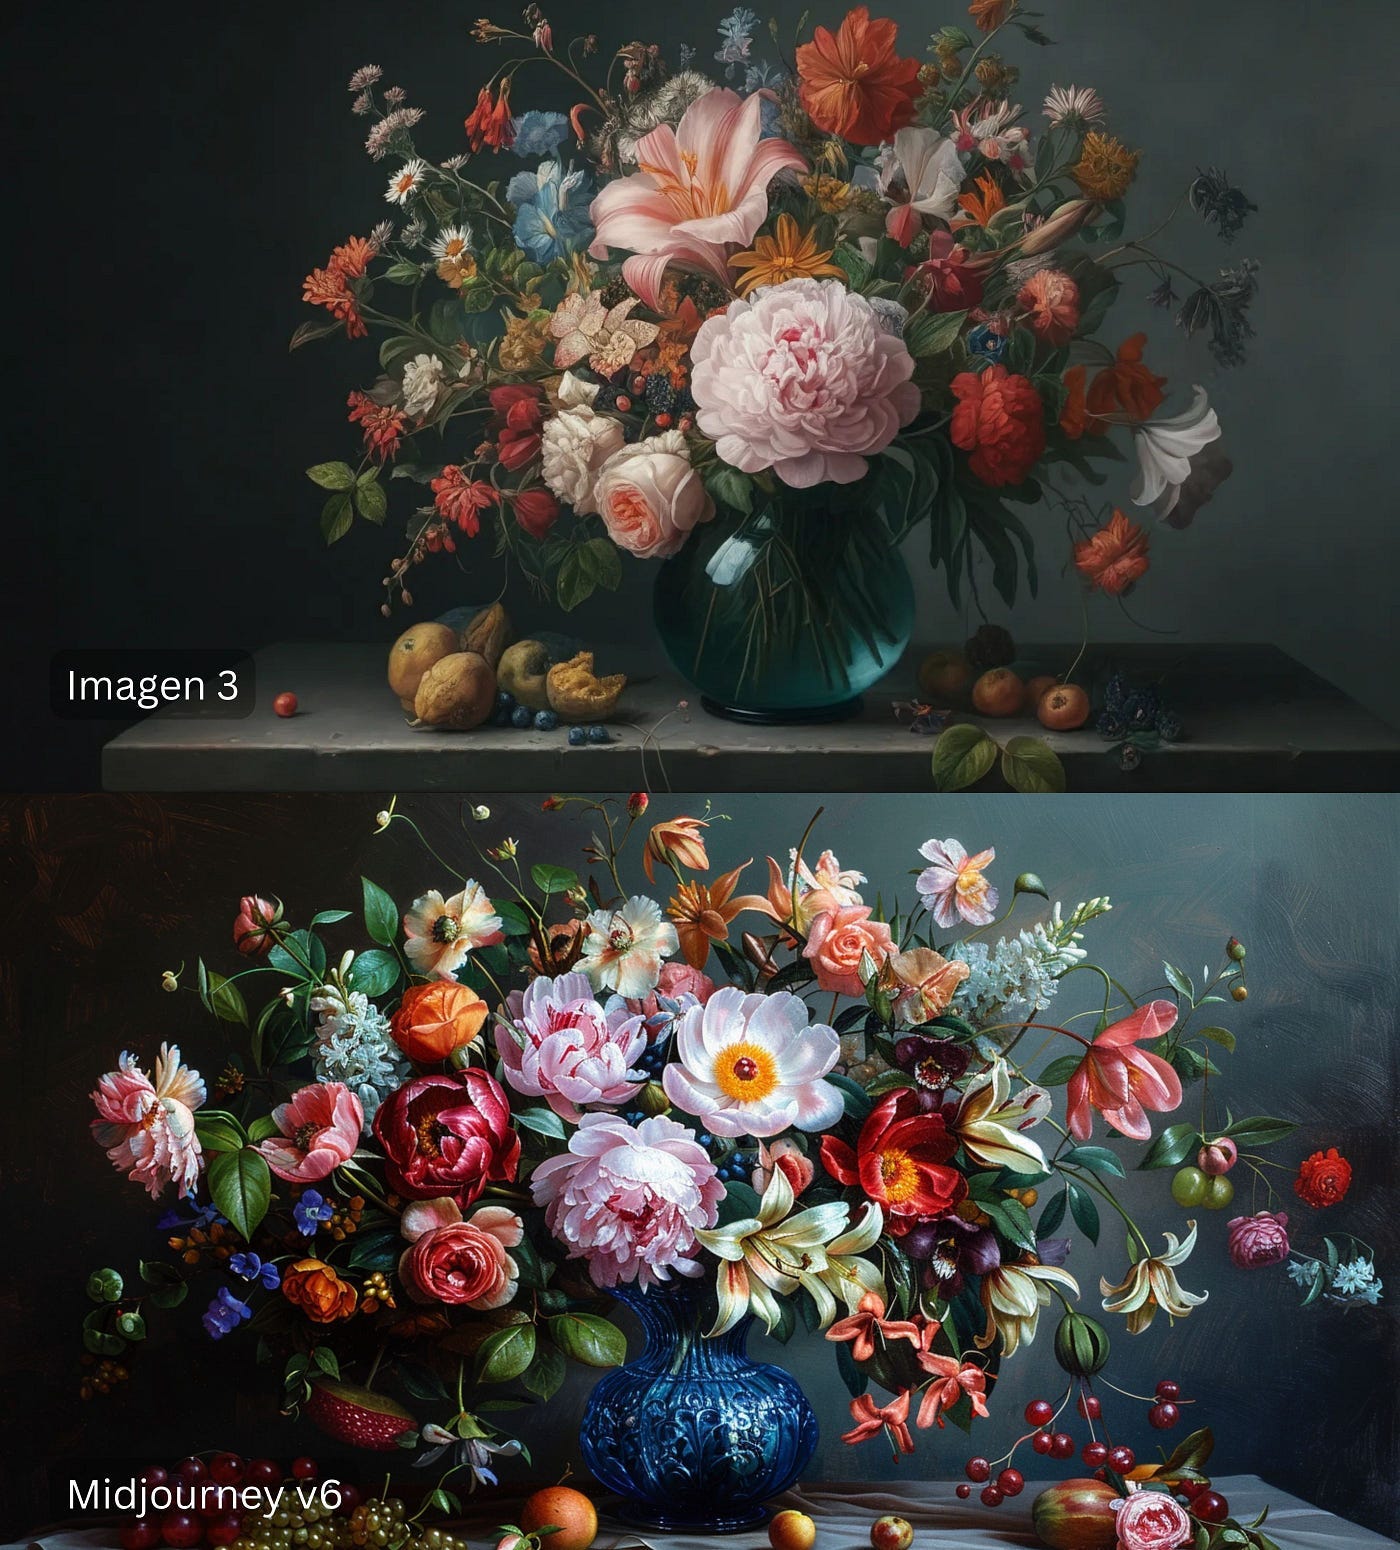 A large, colorful bouquet of flowers in an old blue glass vase on the table. In front is one beautiful peony flower surrounded by various other blossoms like roses, lilies, daisies, orchids, fruits, berries, green leaves. The background is dark gray. Oil painting in the style of the Dutch Golden Age.